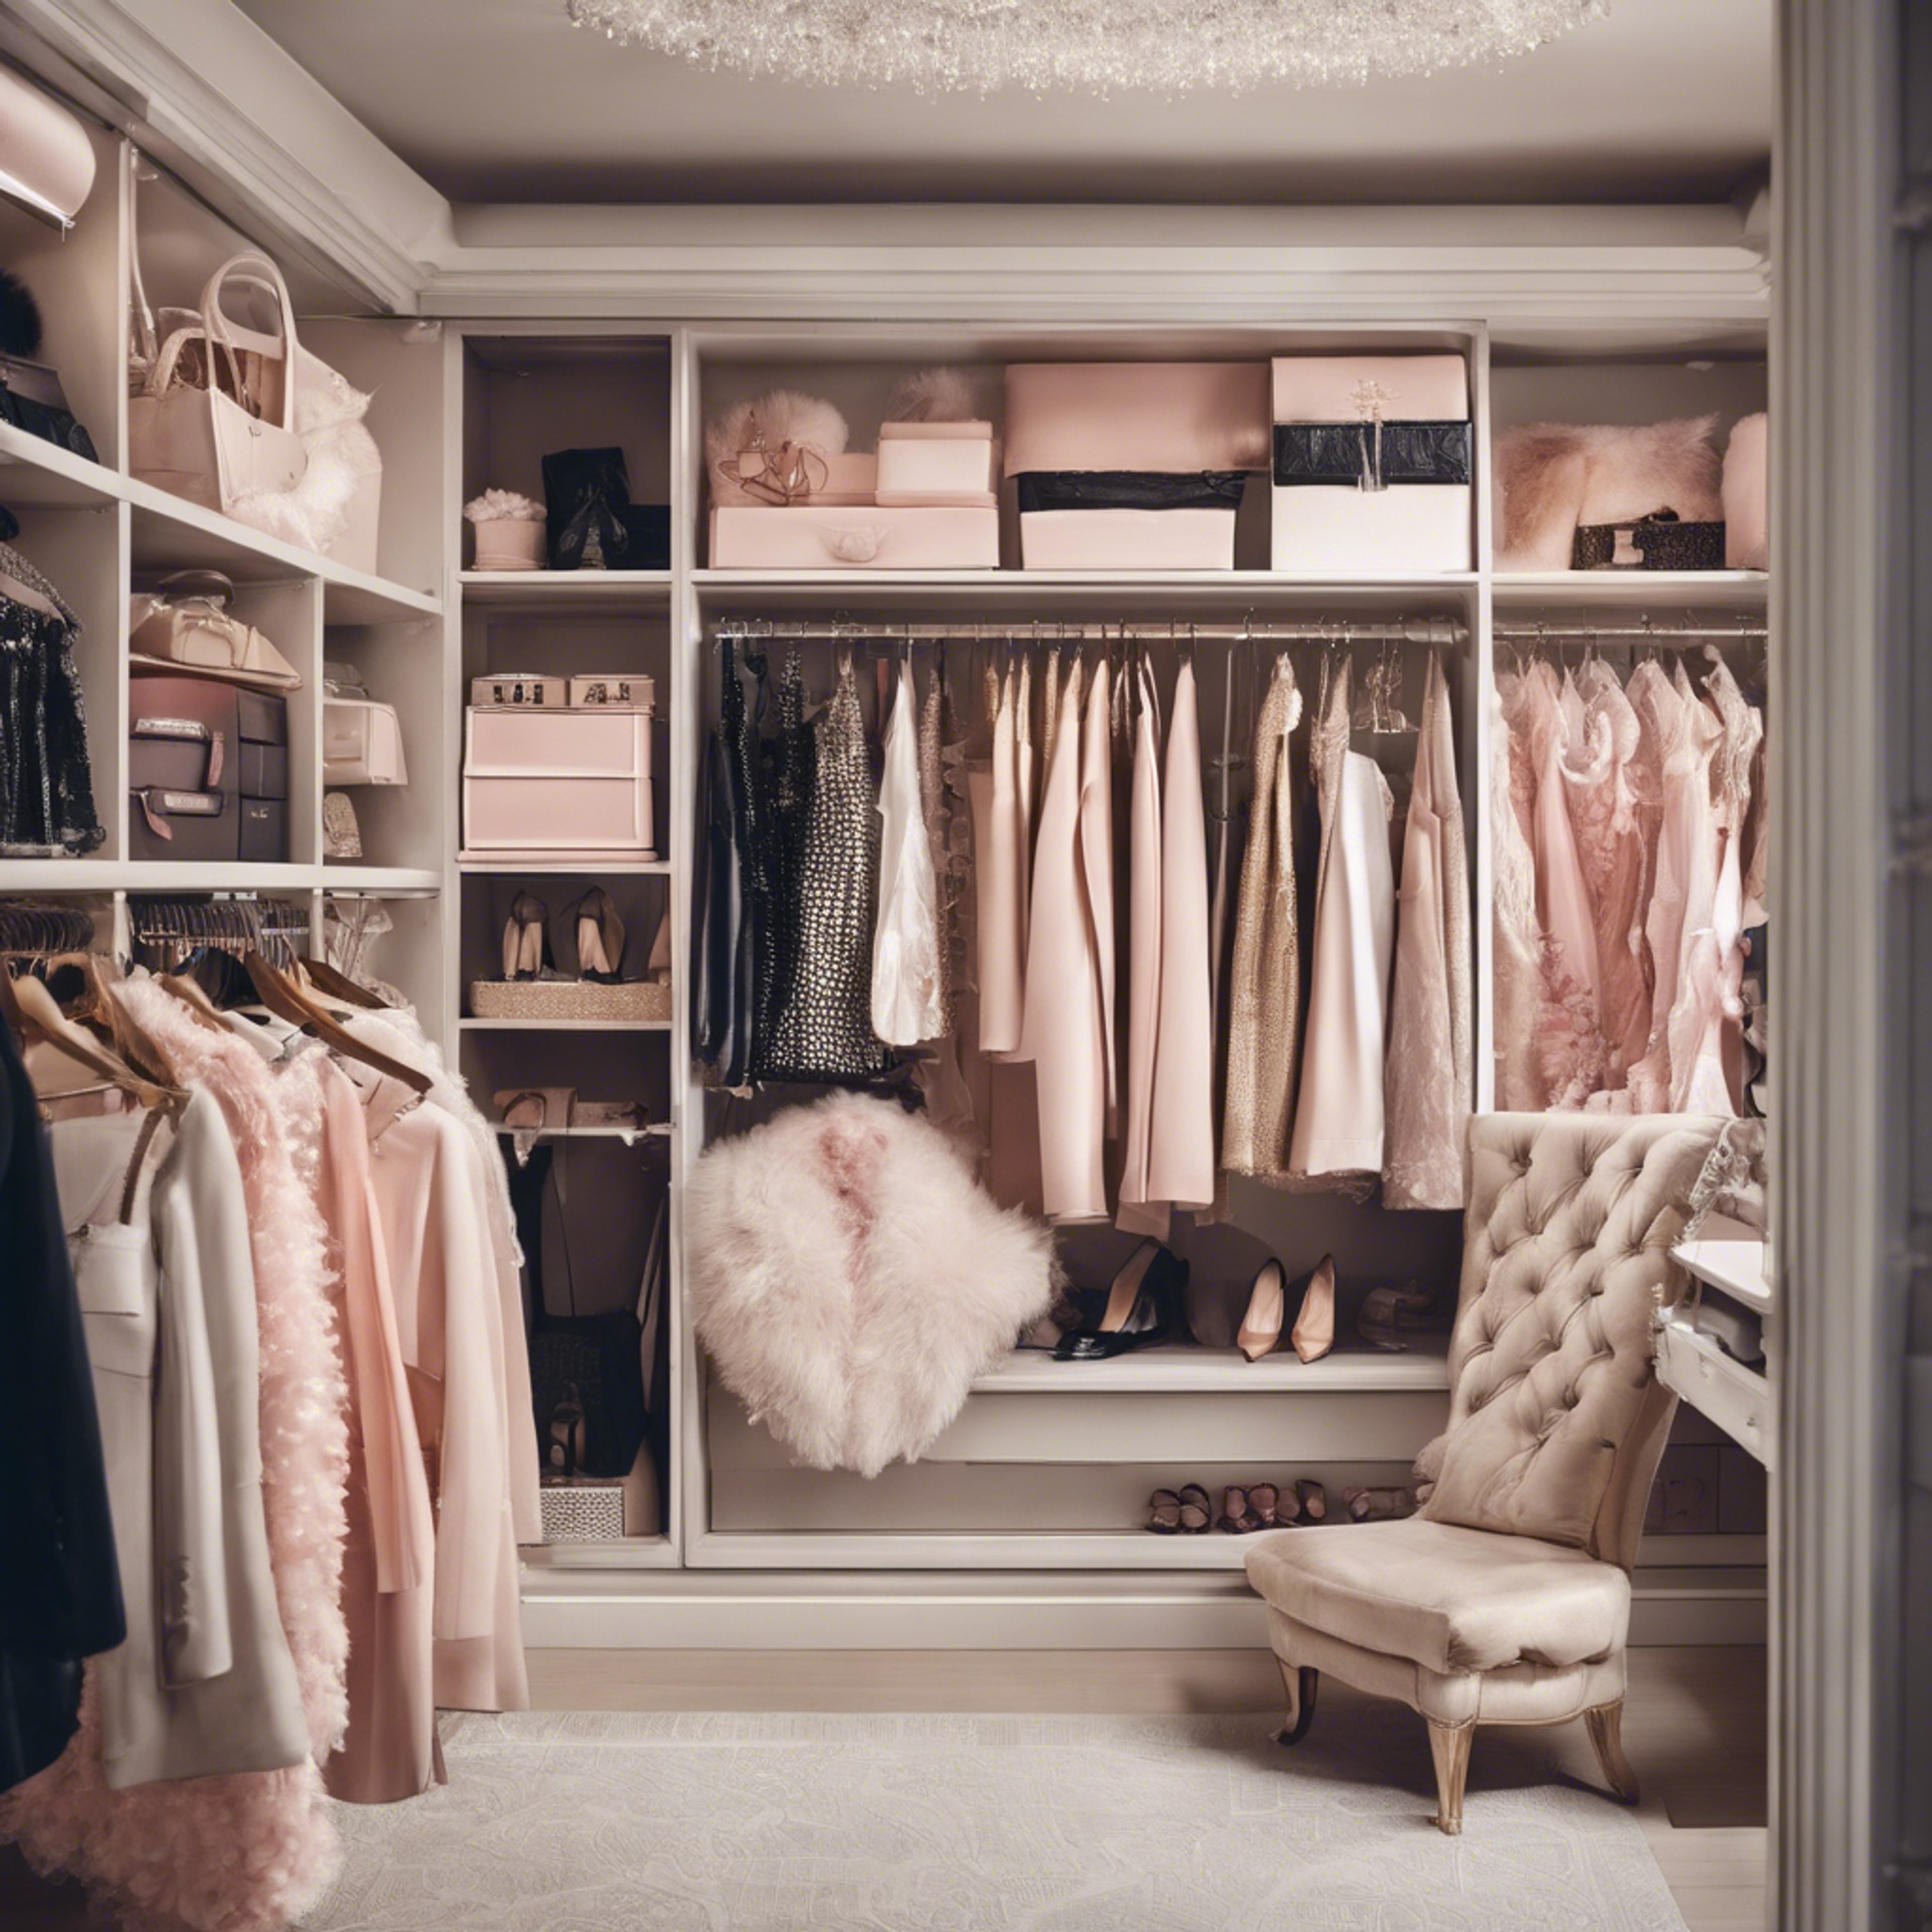 A chic and girly walk-in closet filled with French couture fashion and accessories. Tapeta[8866e00bbc364656a394]